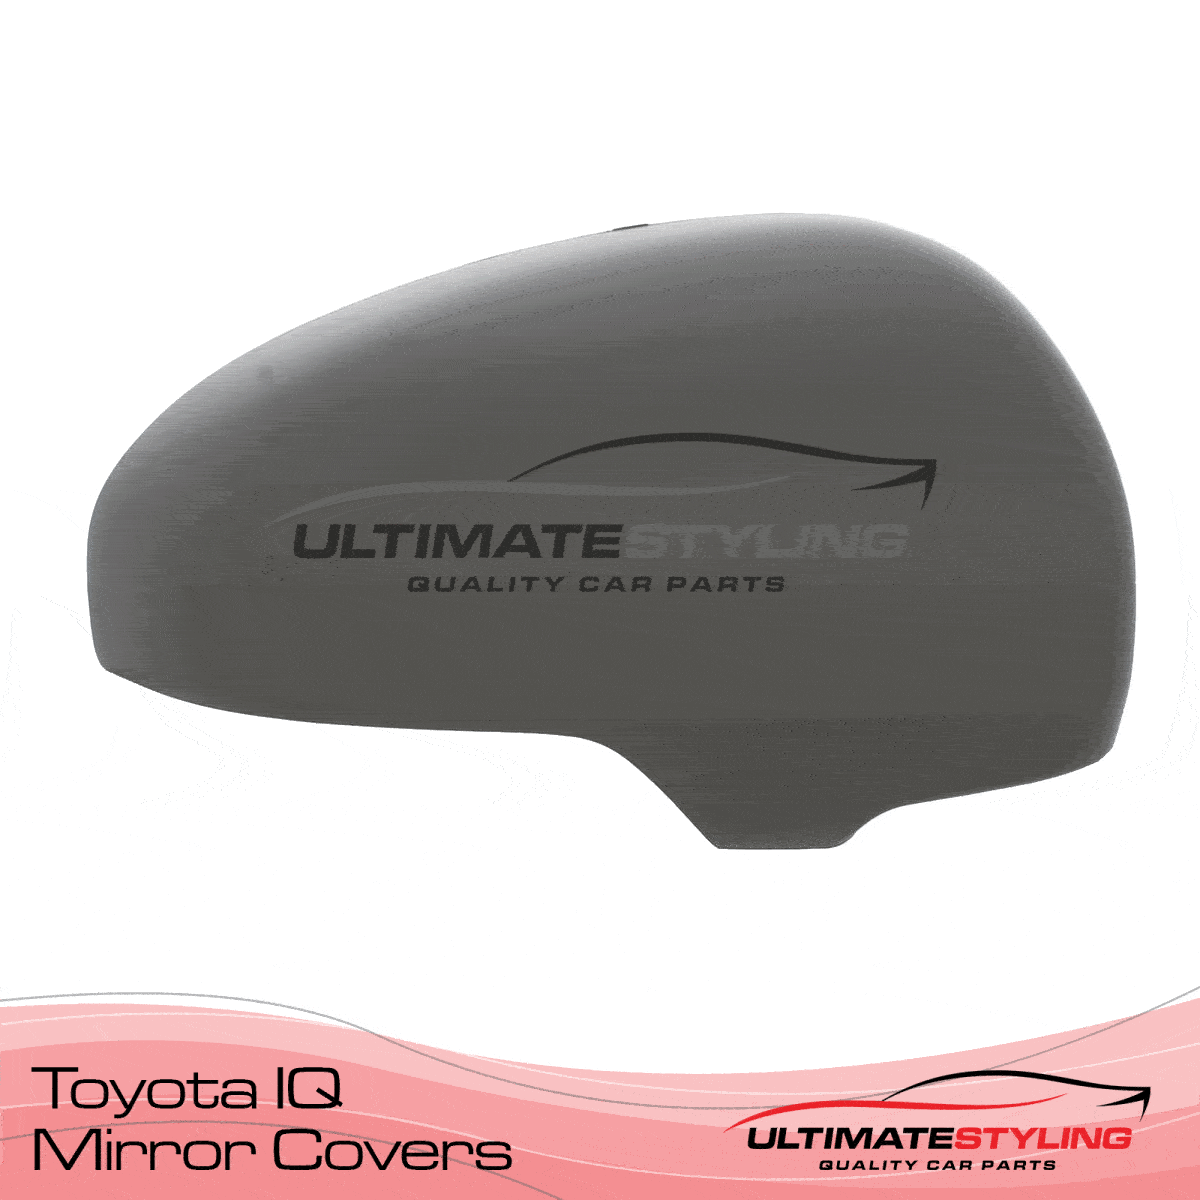 360 degree view of a Toyota IQ wing mirror cover